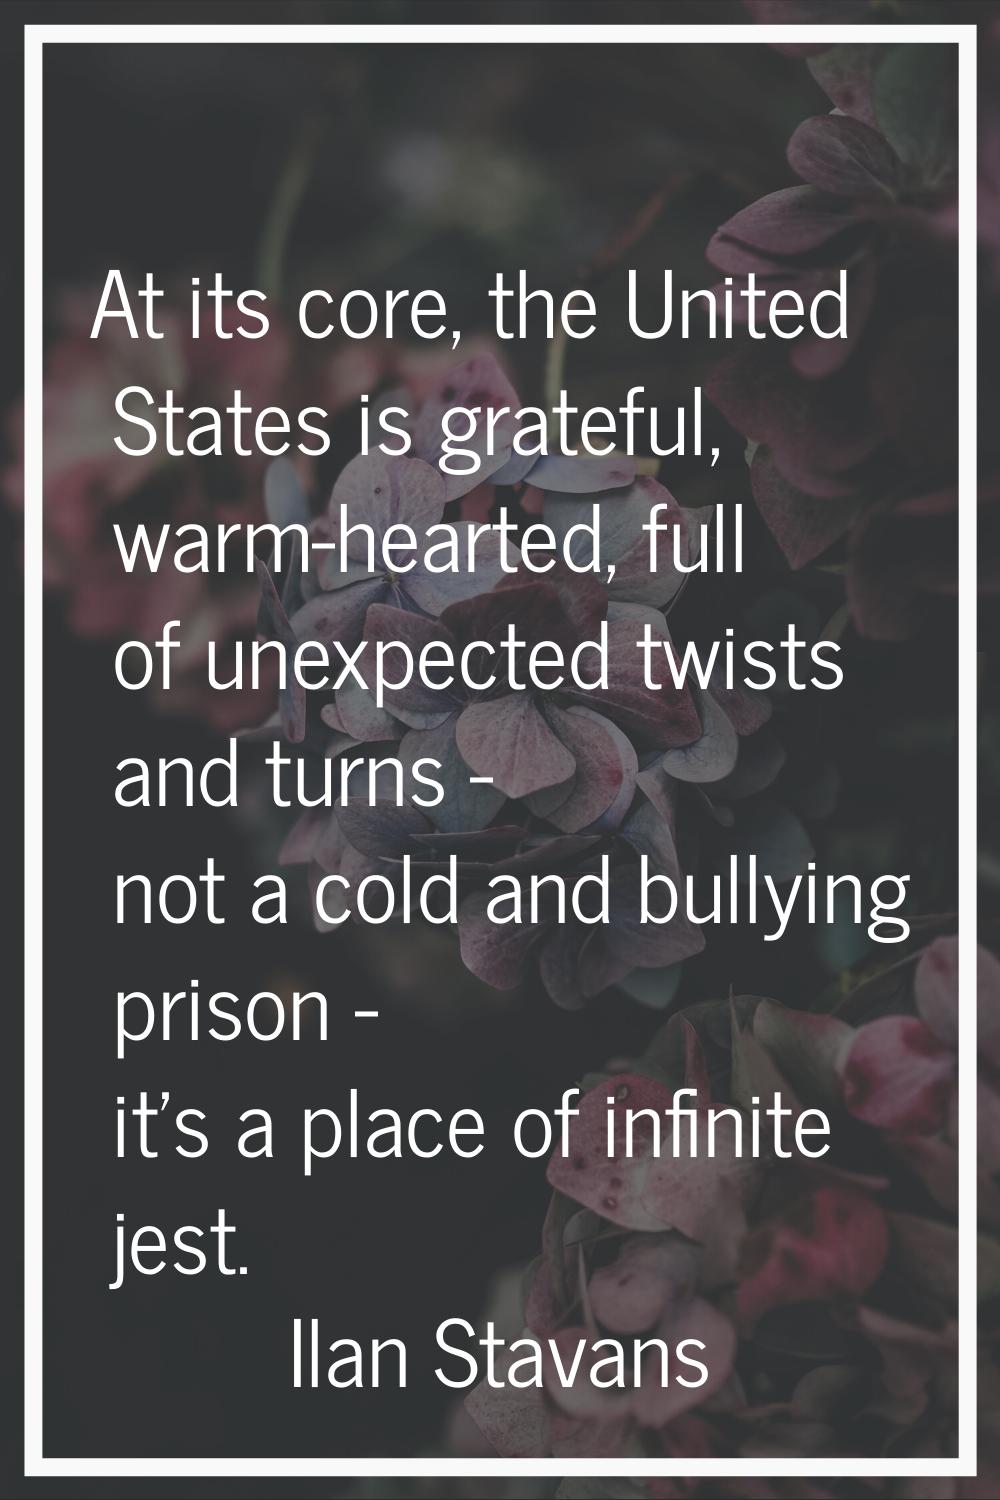 At its core, the United States is grateful, warm-hearted, full of unexpected twists and turns - not